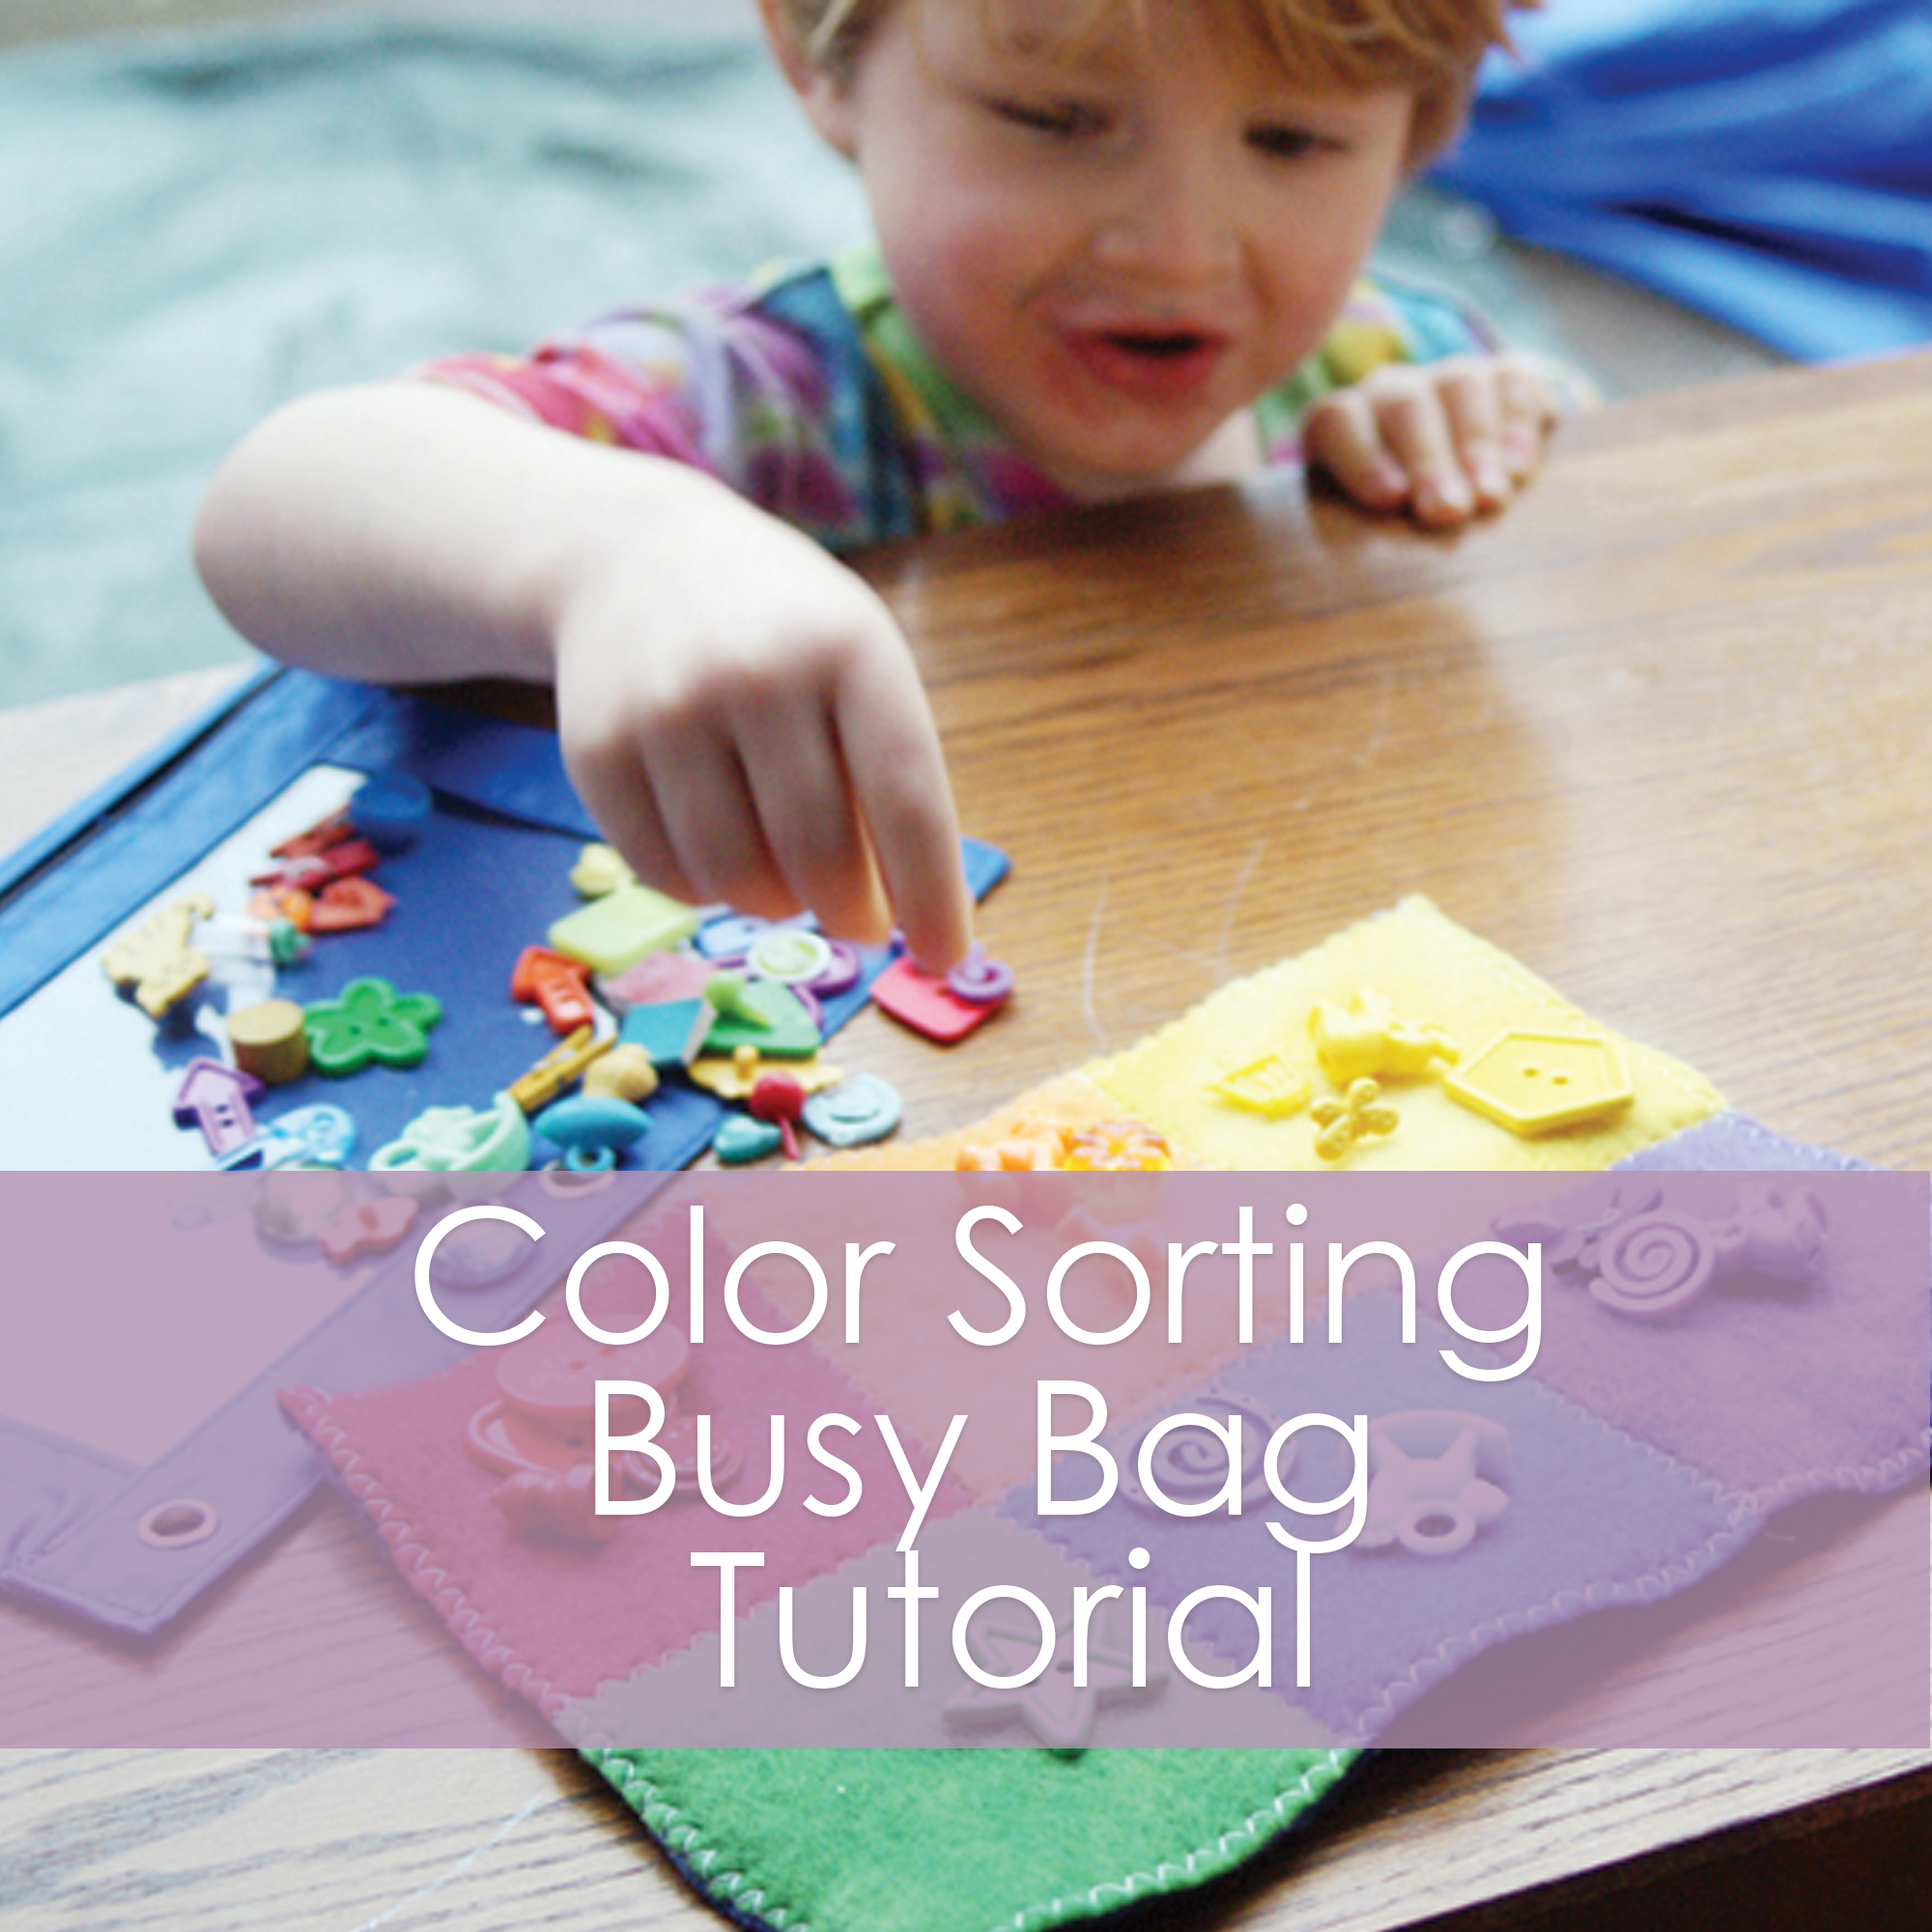 Color Sorting Busy Bag Activity - a tutorial from Muse of the Morning